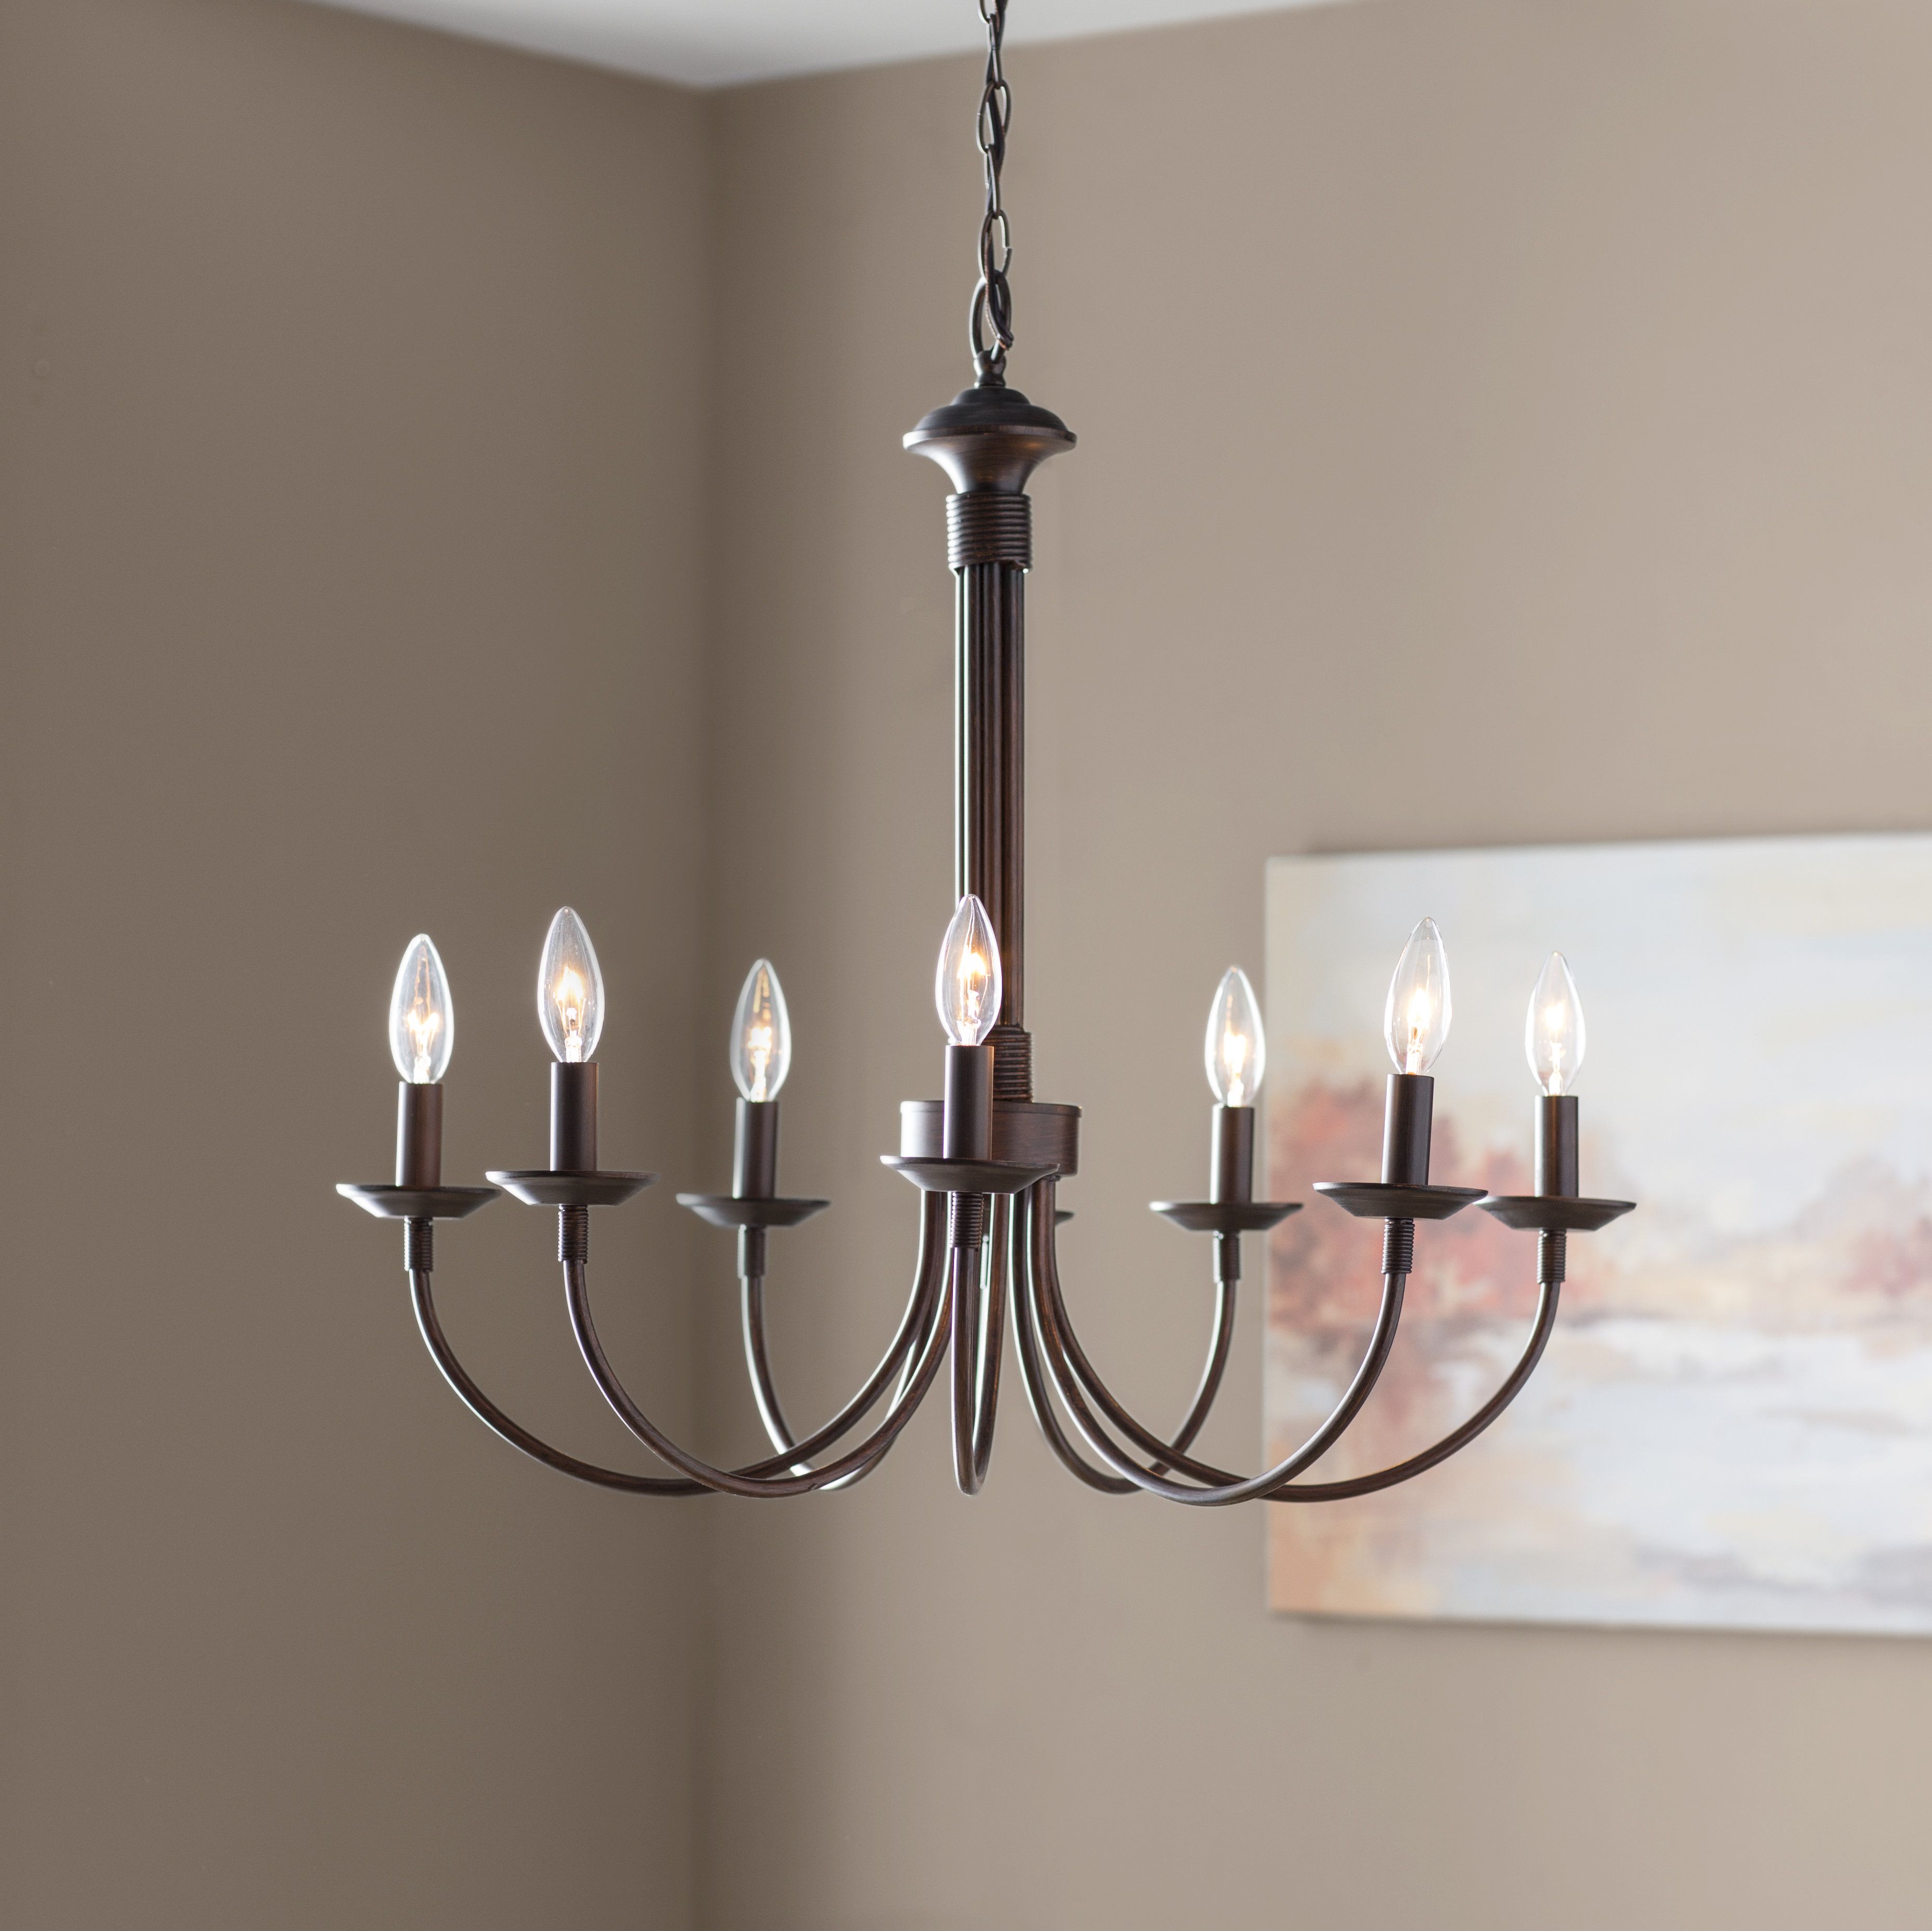 Shaylee 8 Light Candle Style Chandelier Intended For Giverny 9 Light Candle Style Chandeliers (View 17 of 30)